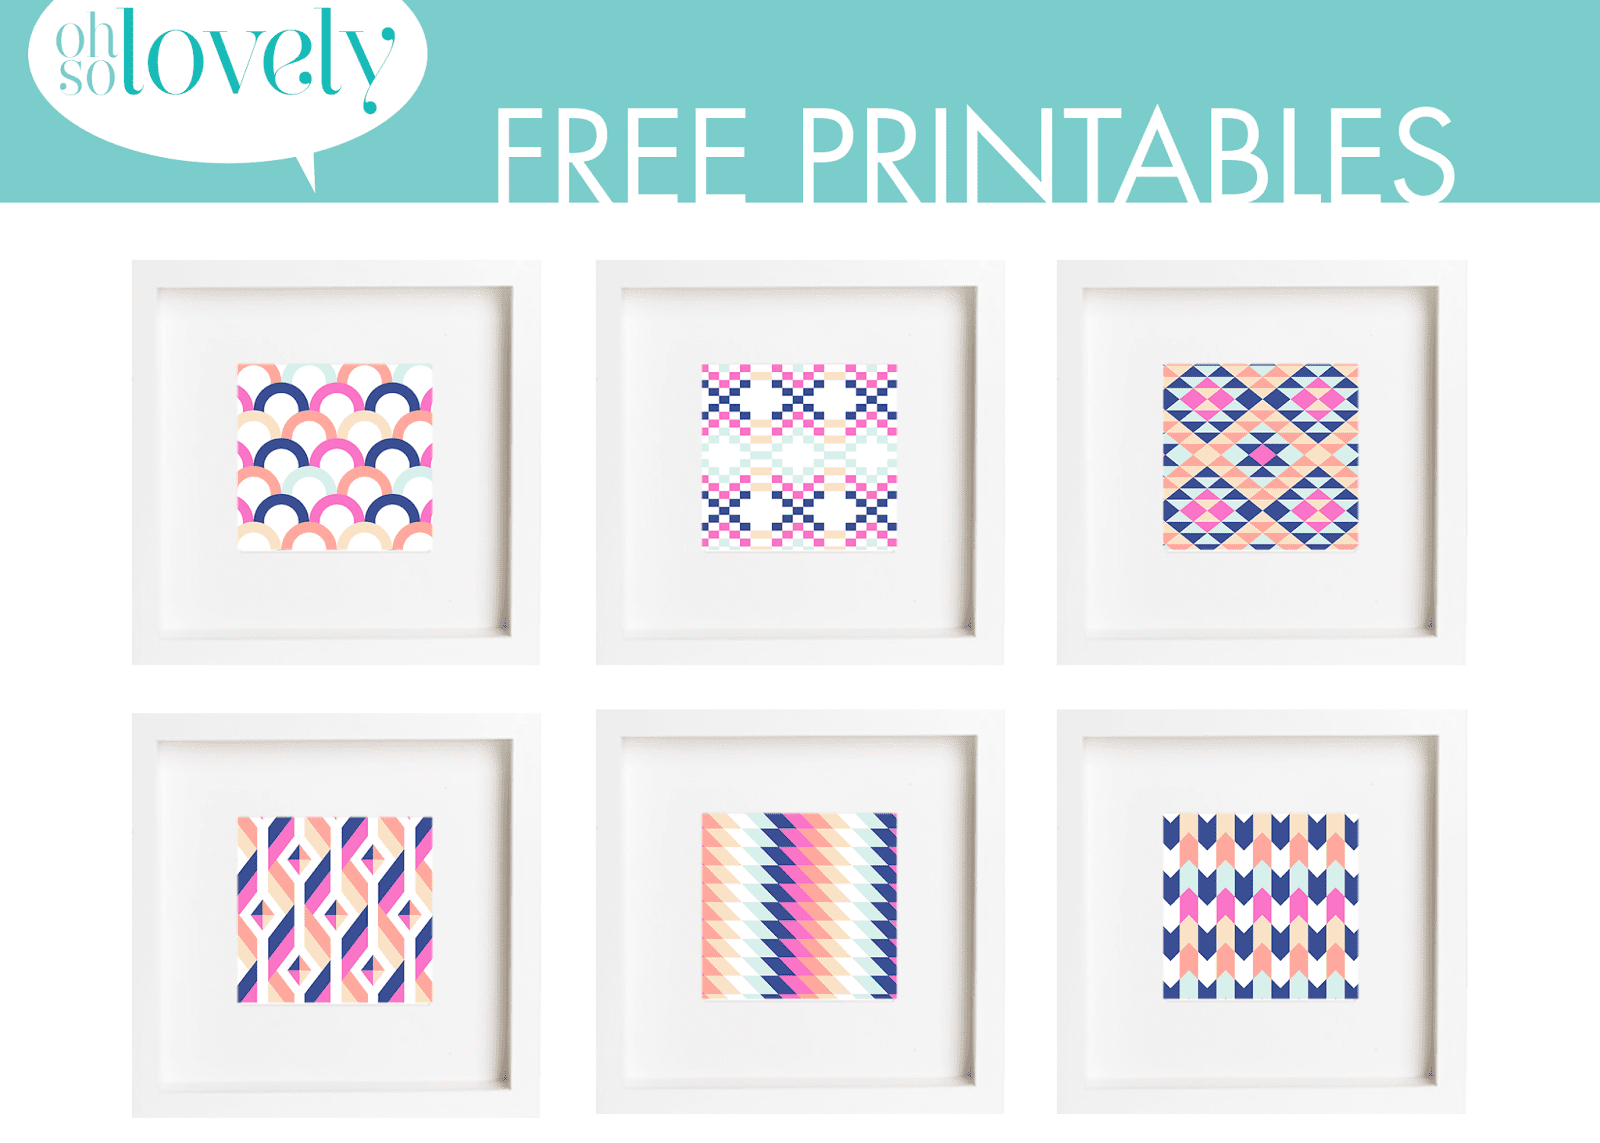 11 Places To Find Free, Printable Wall Art Online - Free Printable Art Pictures